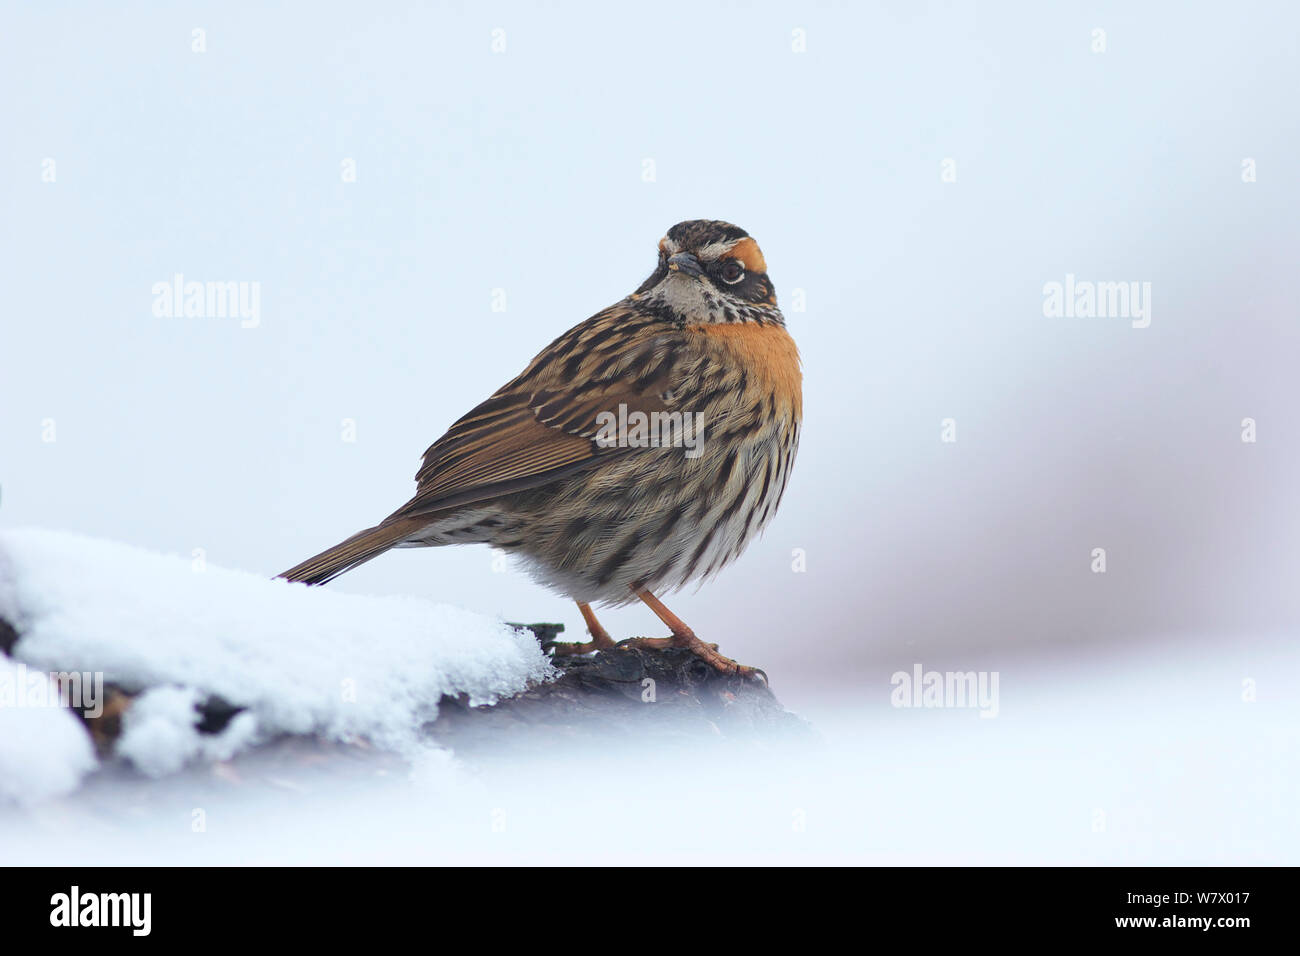 Rufous-breasted Accentor (Prunella strophiata) in snow, Yajiang county, Sichuan Province, Qinghai-Tibet Plateau, China, Asia Stock Photo